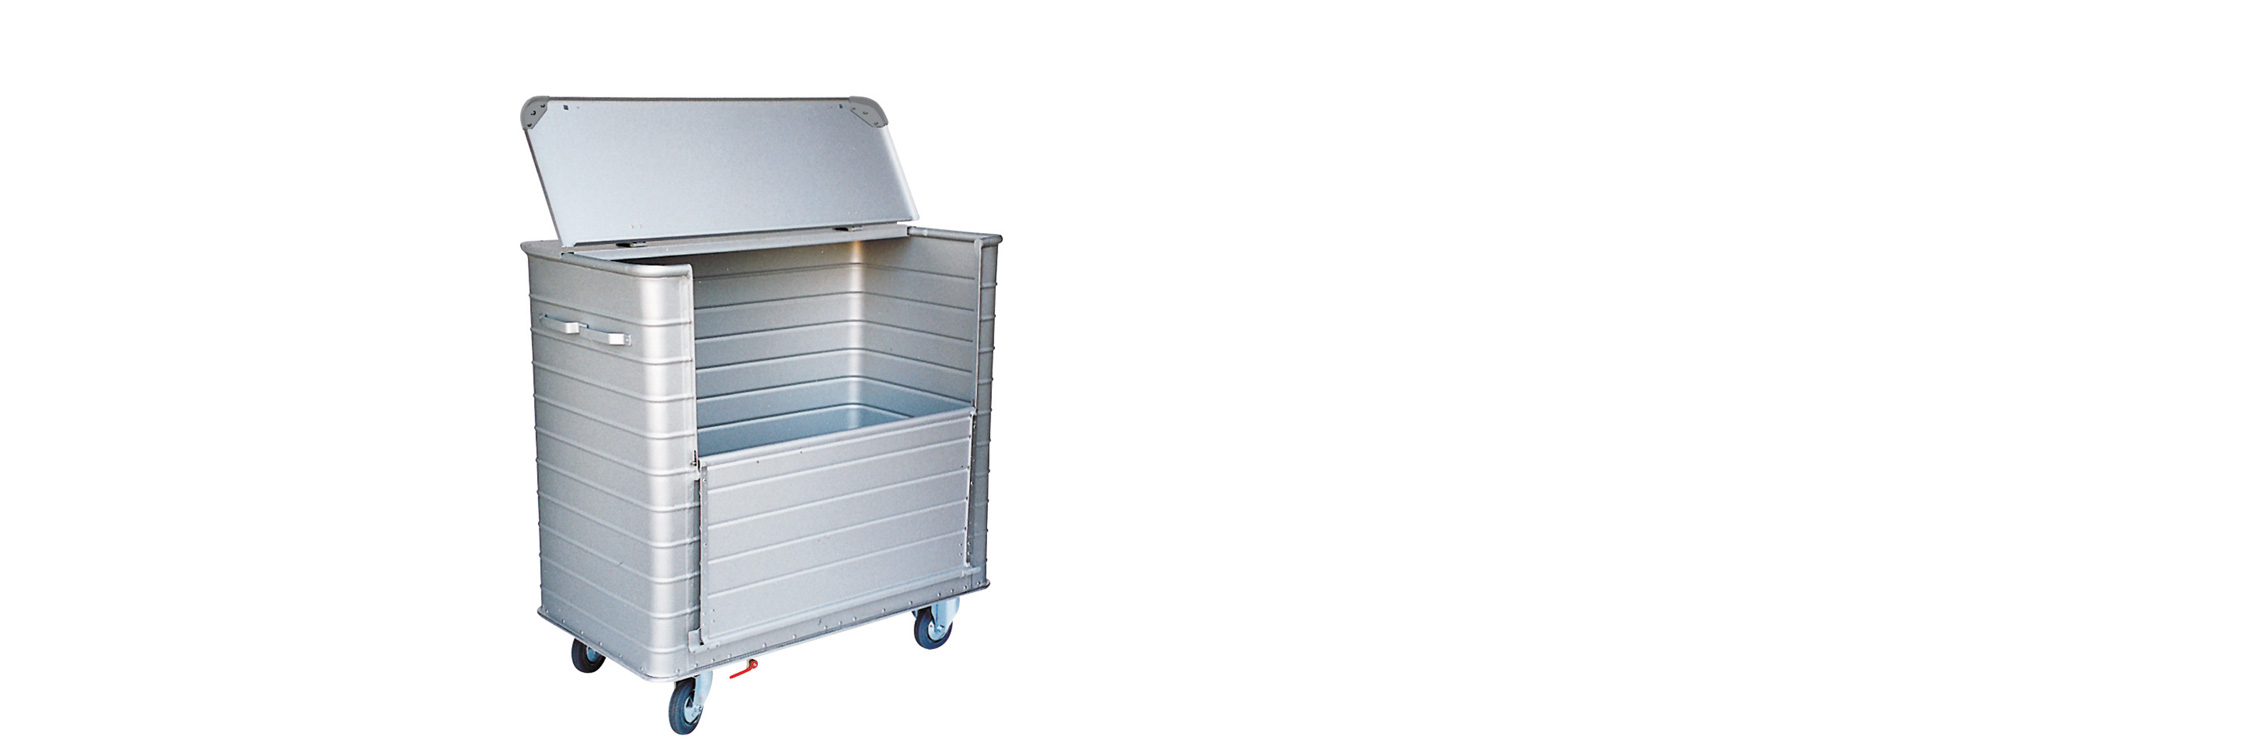 The CT4500CR dirty linen transport container made of anodized aluminium